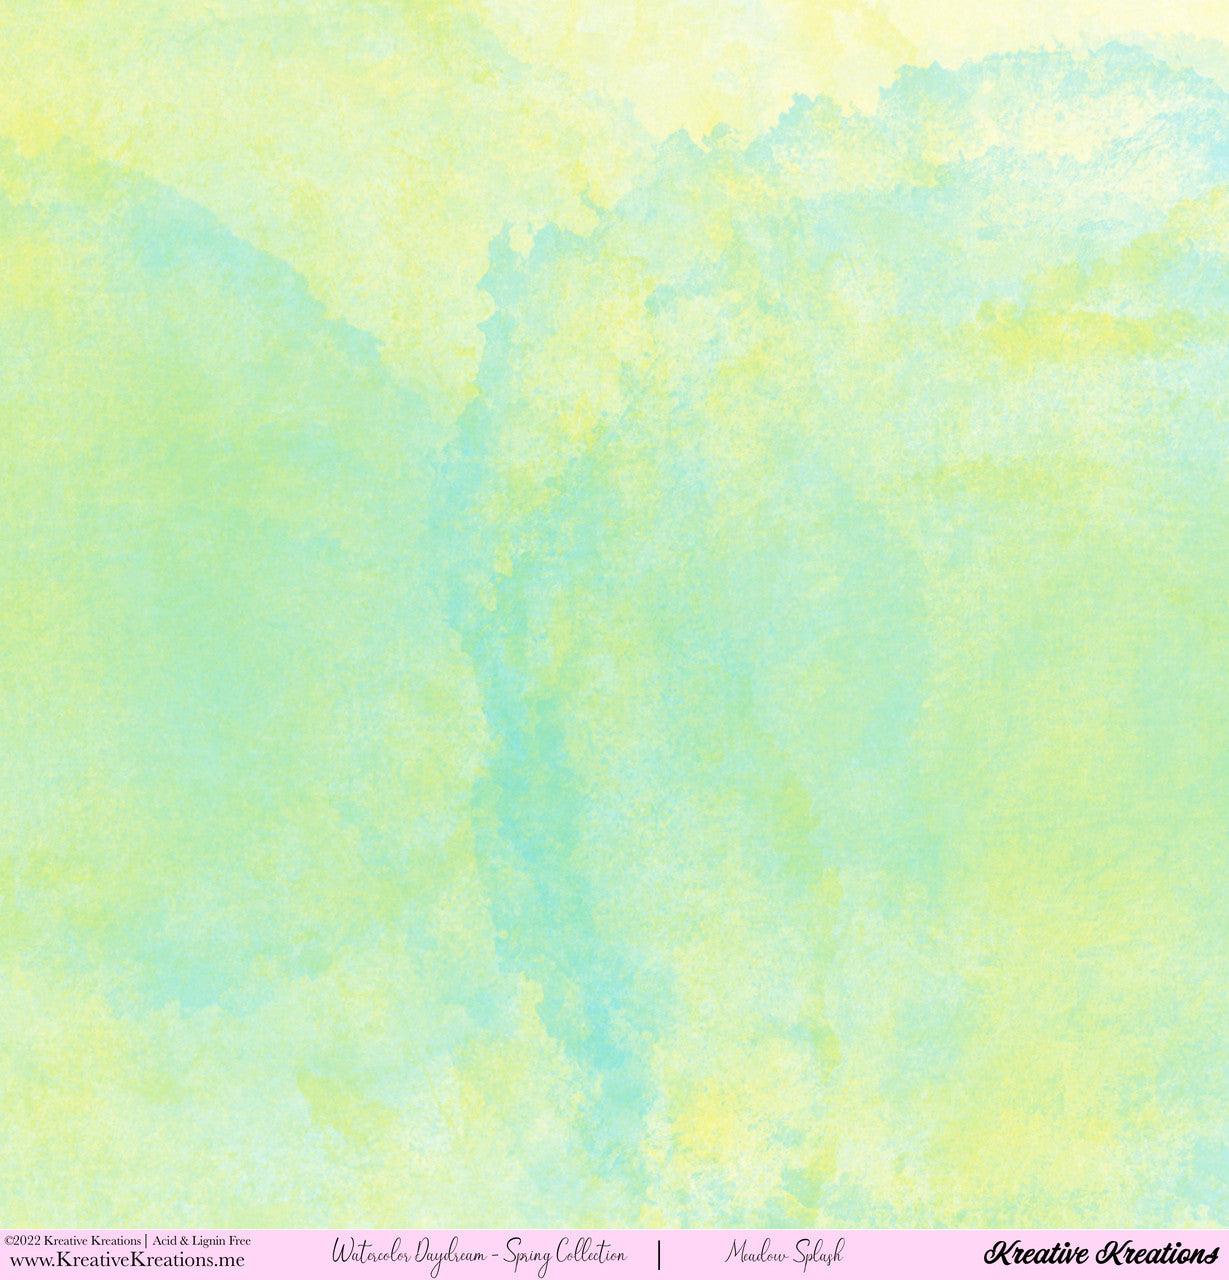 Kreative Kreations Watercolor Daydream - Spring Collection 12” x 12” Paper Collection